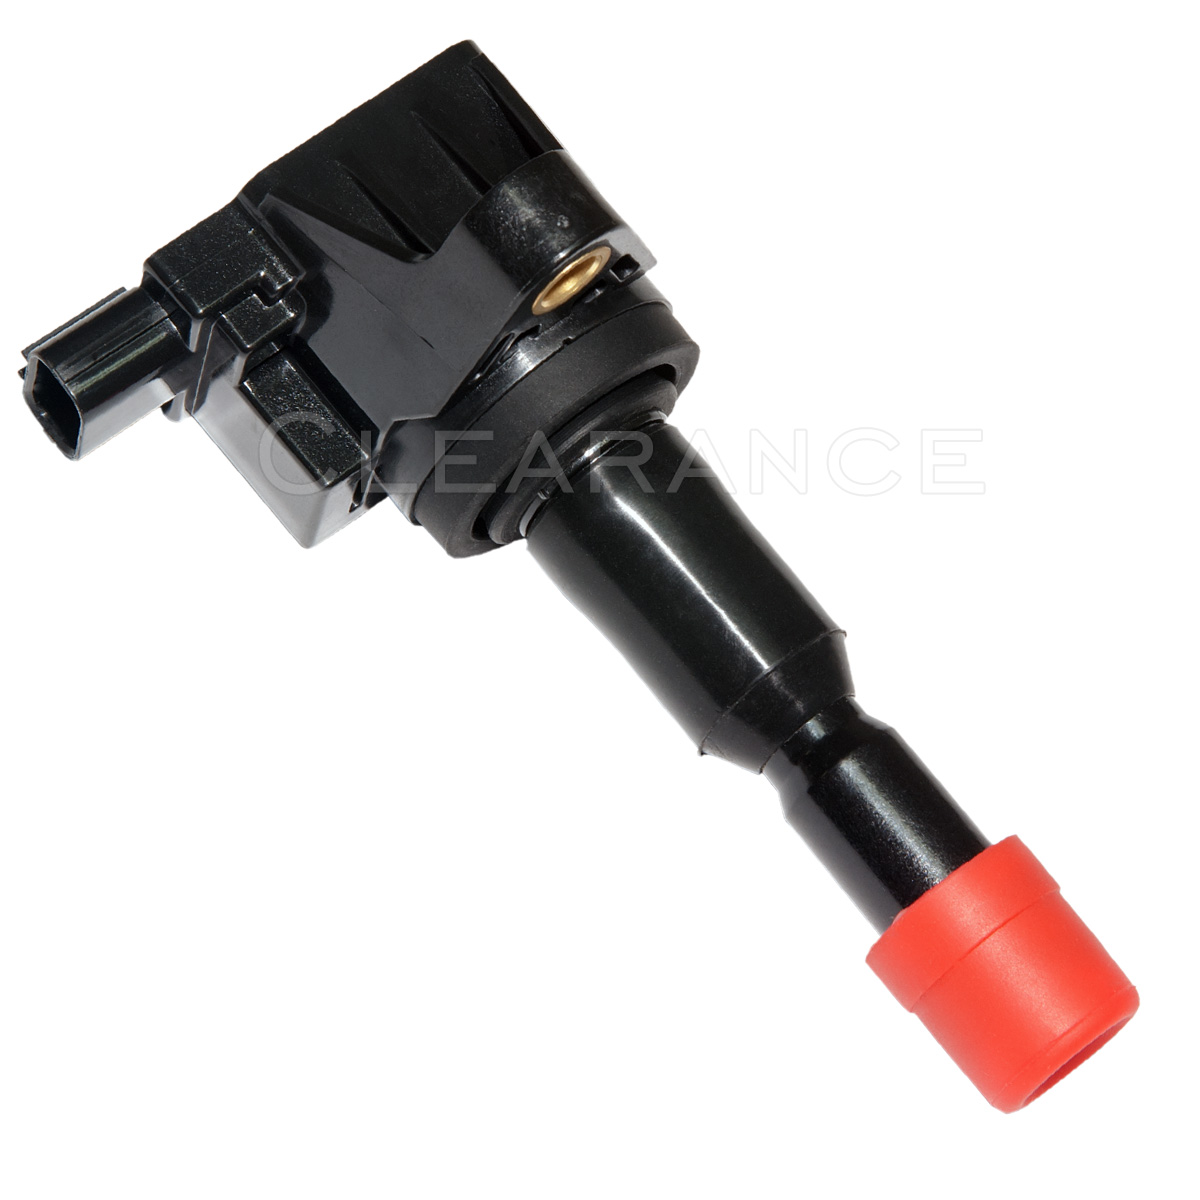 UF581 FOR HONDA FIT 1.5L IGNITION COIL 2007-2008  PACK OF 4 PREMIUM C1578